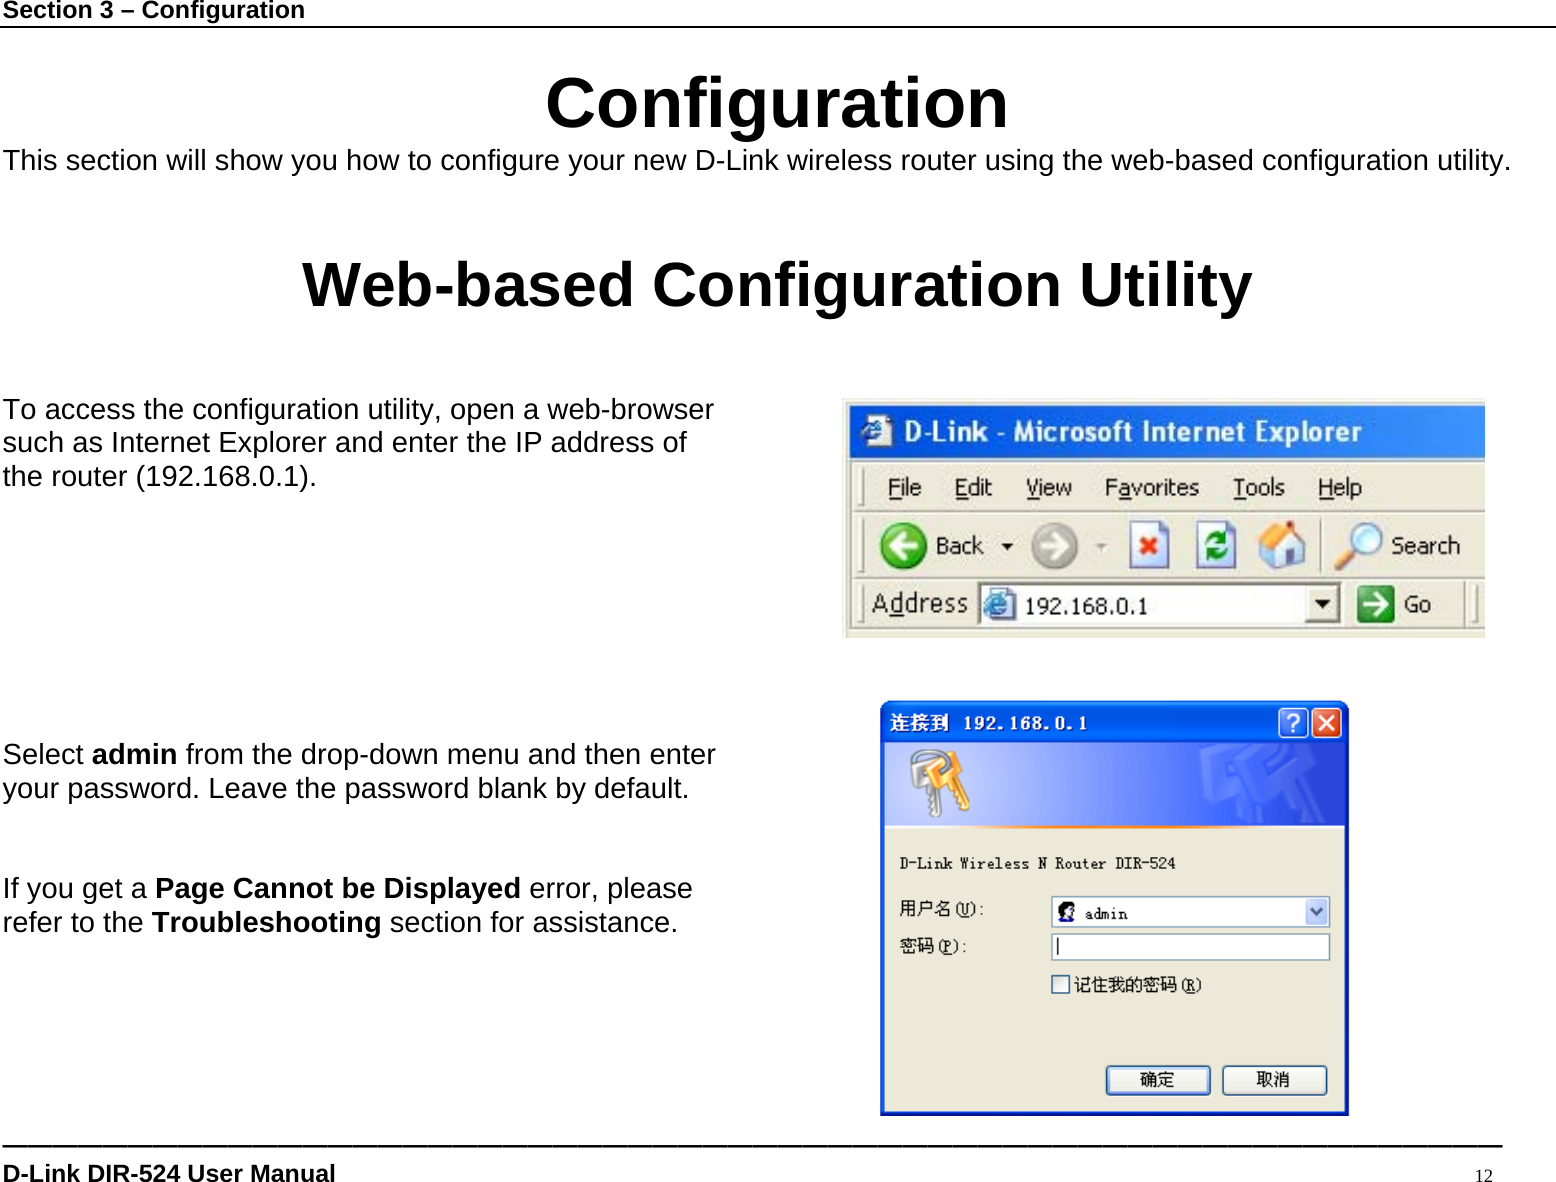 Section 3 – Configuration ———————————————————————————————————————————————————————————— D-Link DIR-524 User Manual                                                                                           12  Configuration This section will show you how to configure your new D-Link wireless router using the web-based configuration utility.  Web-based Configuration Utility  To access the configuration utility, open a web-browser   such as Internet Explorer and enter the IP address of the router (192.168.0.1).        Select admin from the drop-down menu and then enter your password. Leave the password blank by default.   If you get a Page Cannot be Displayed error, please refer to the Troubleshooting section for assistance.     